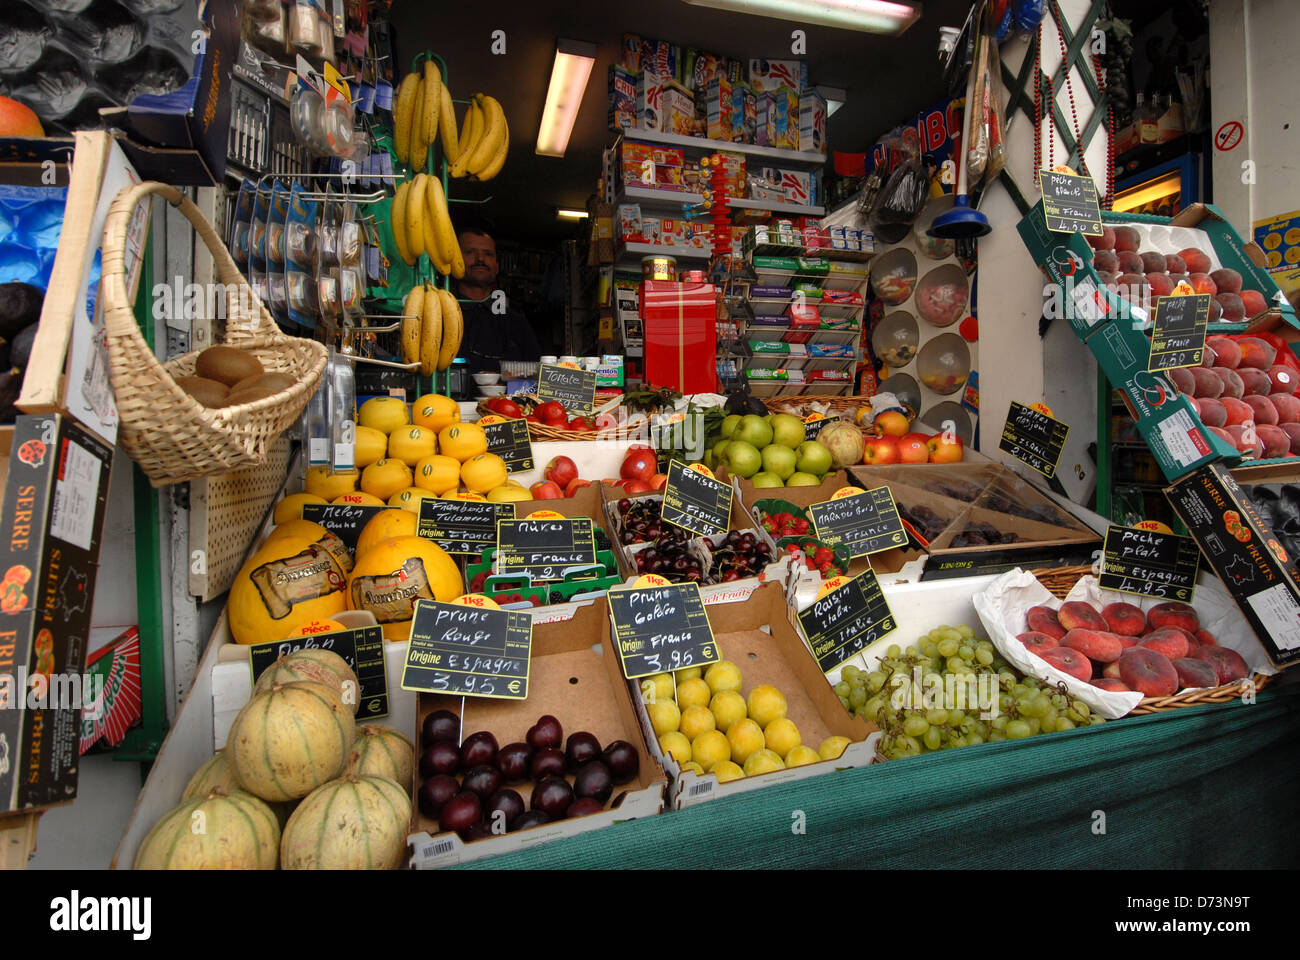 A fresh fruit display in front of a grocer's shop in Paris France. Stock Photo